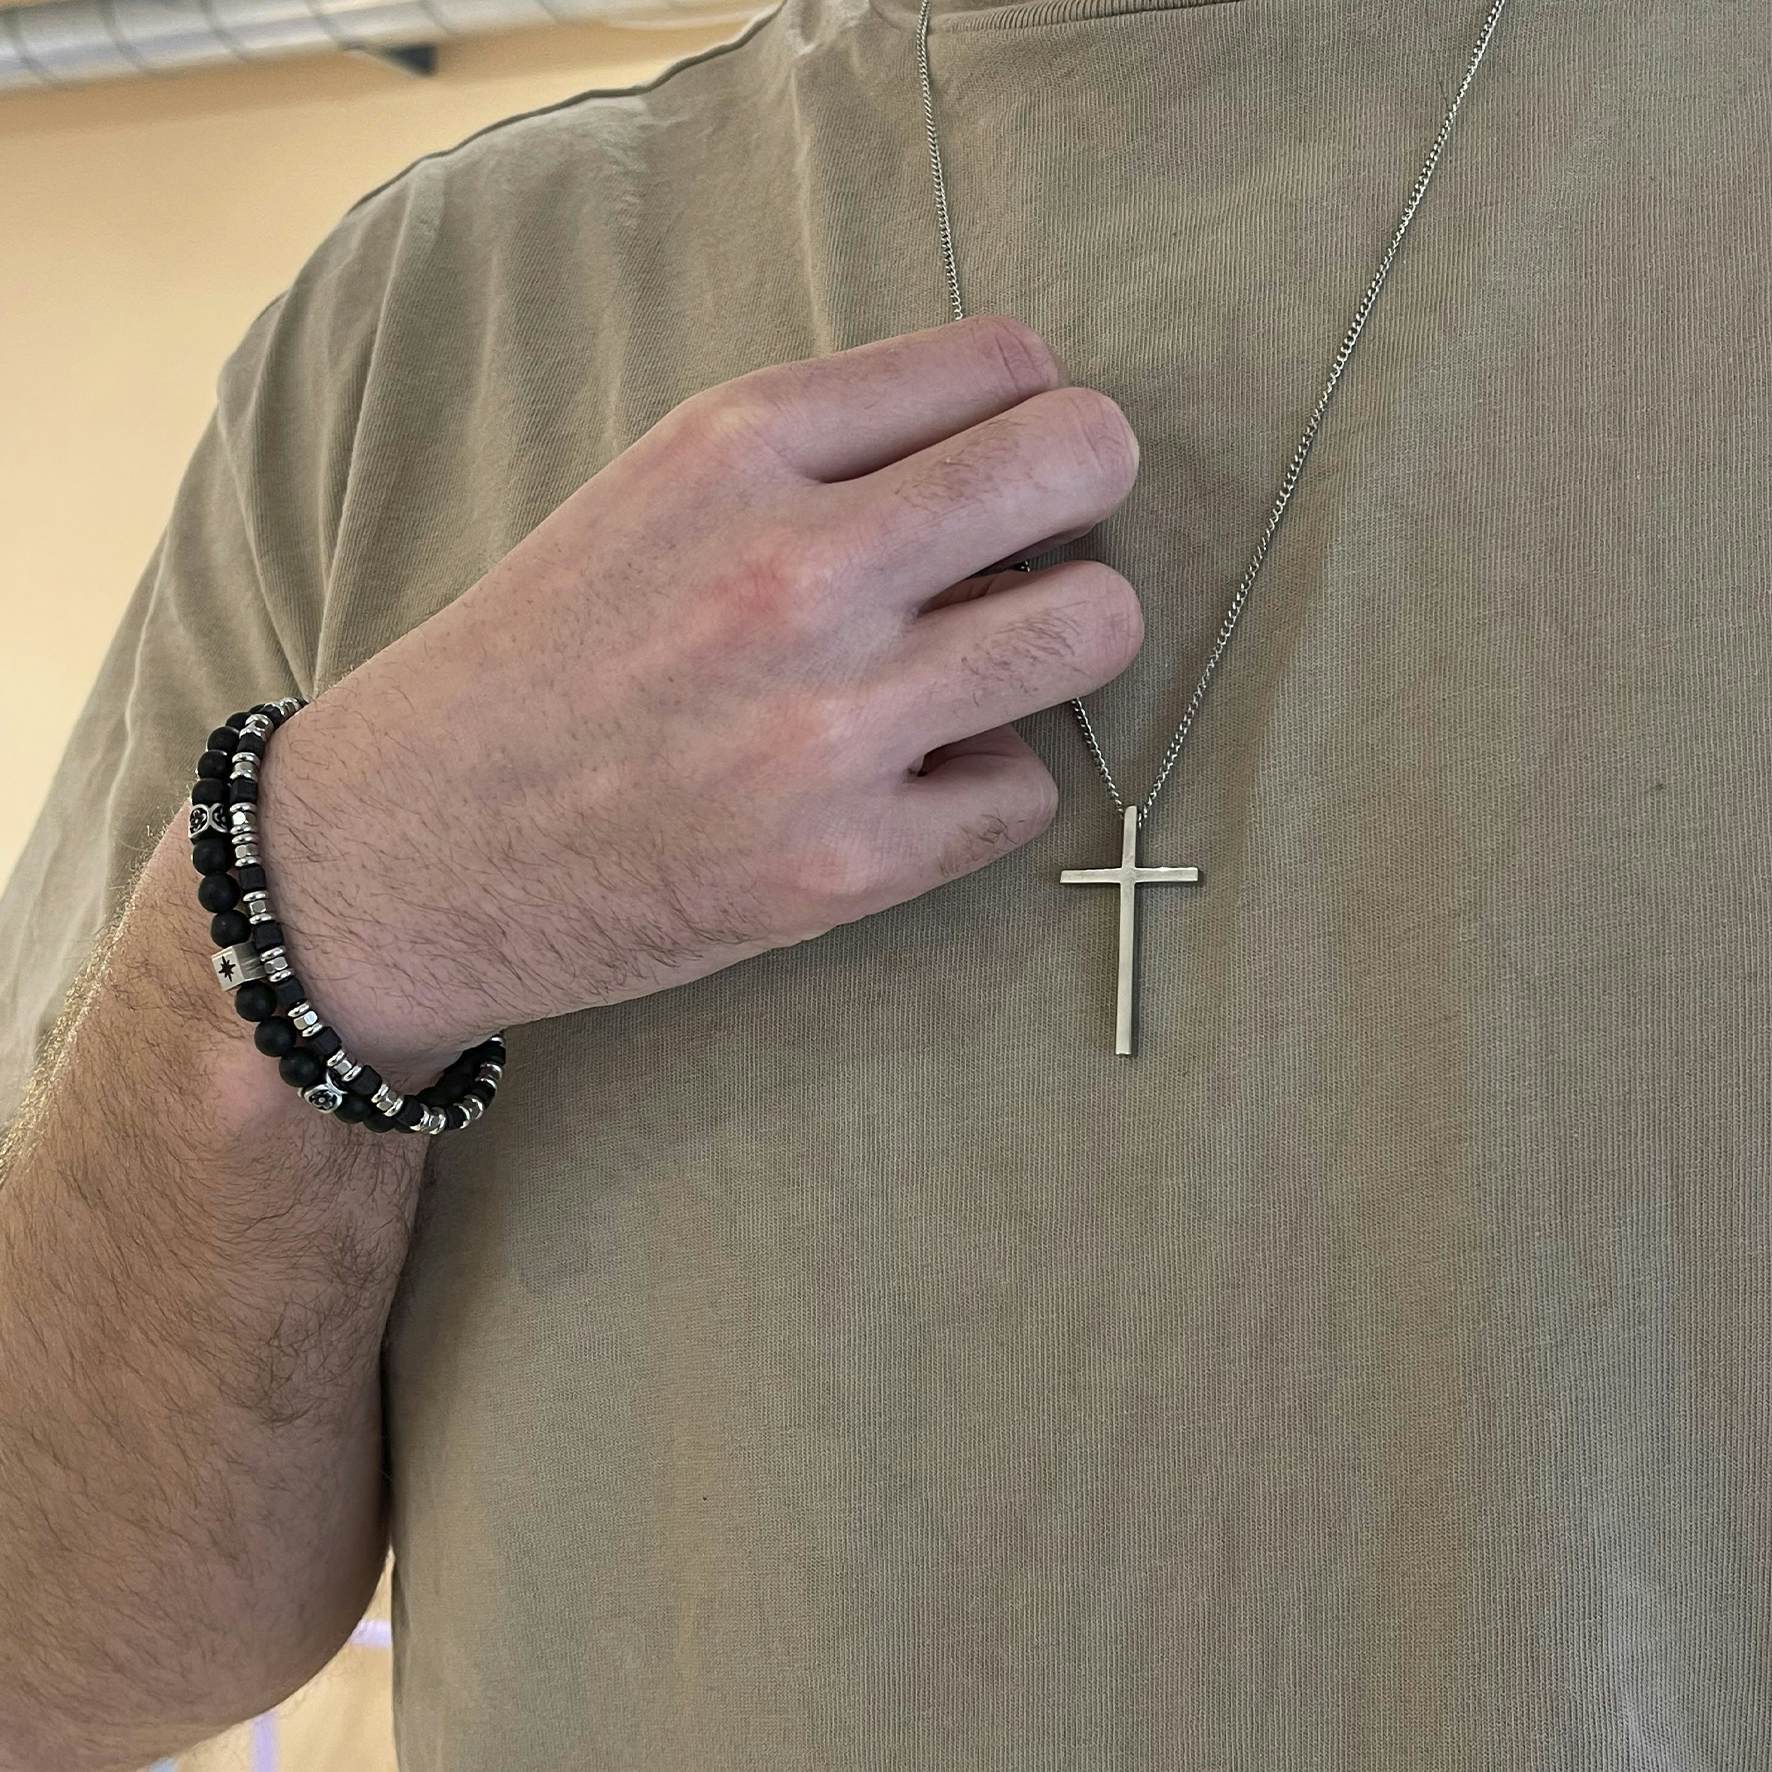 Cross Necklace from SAMIE in Stainless steel